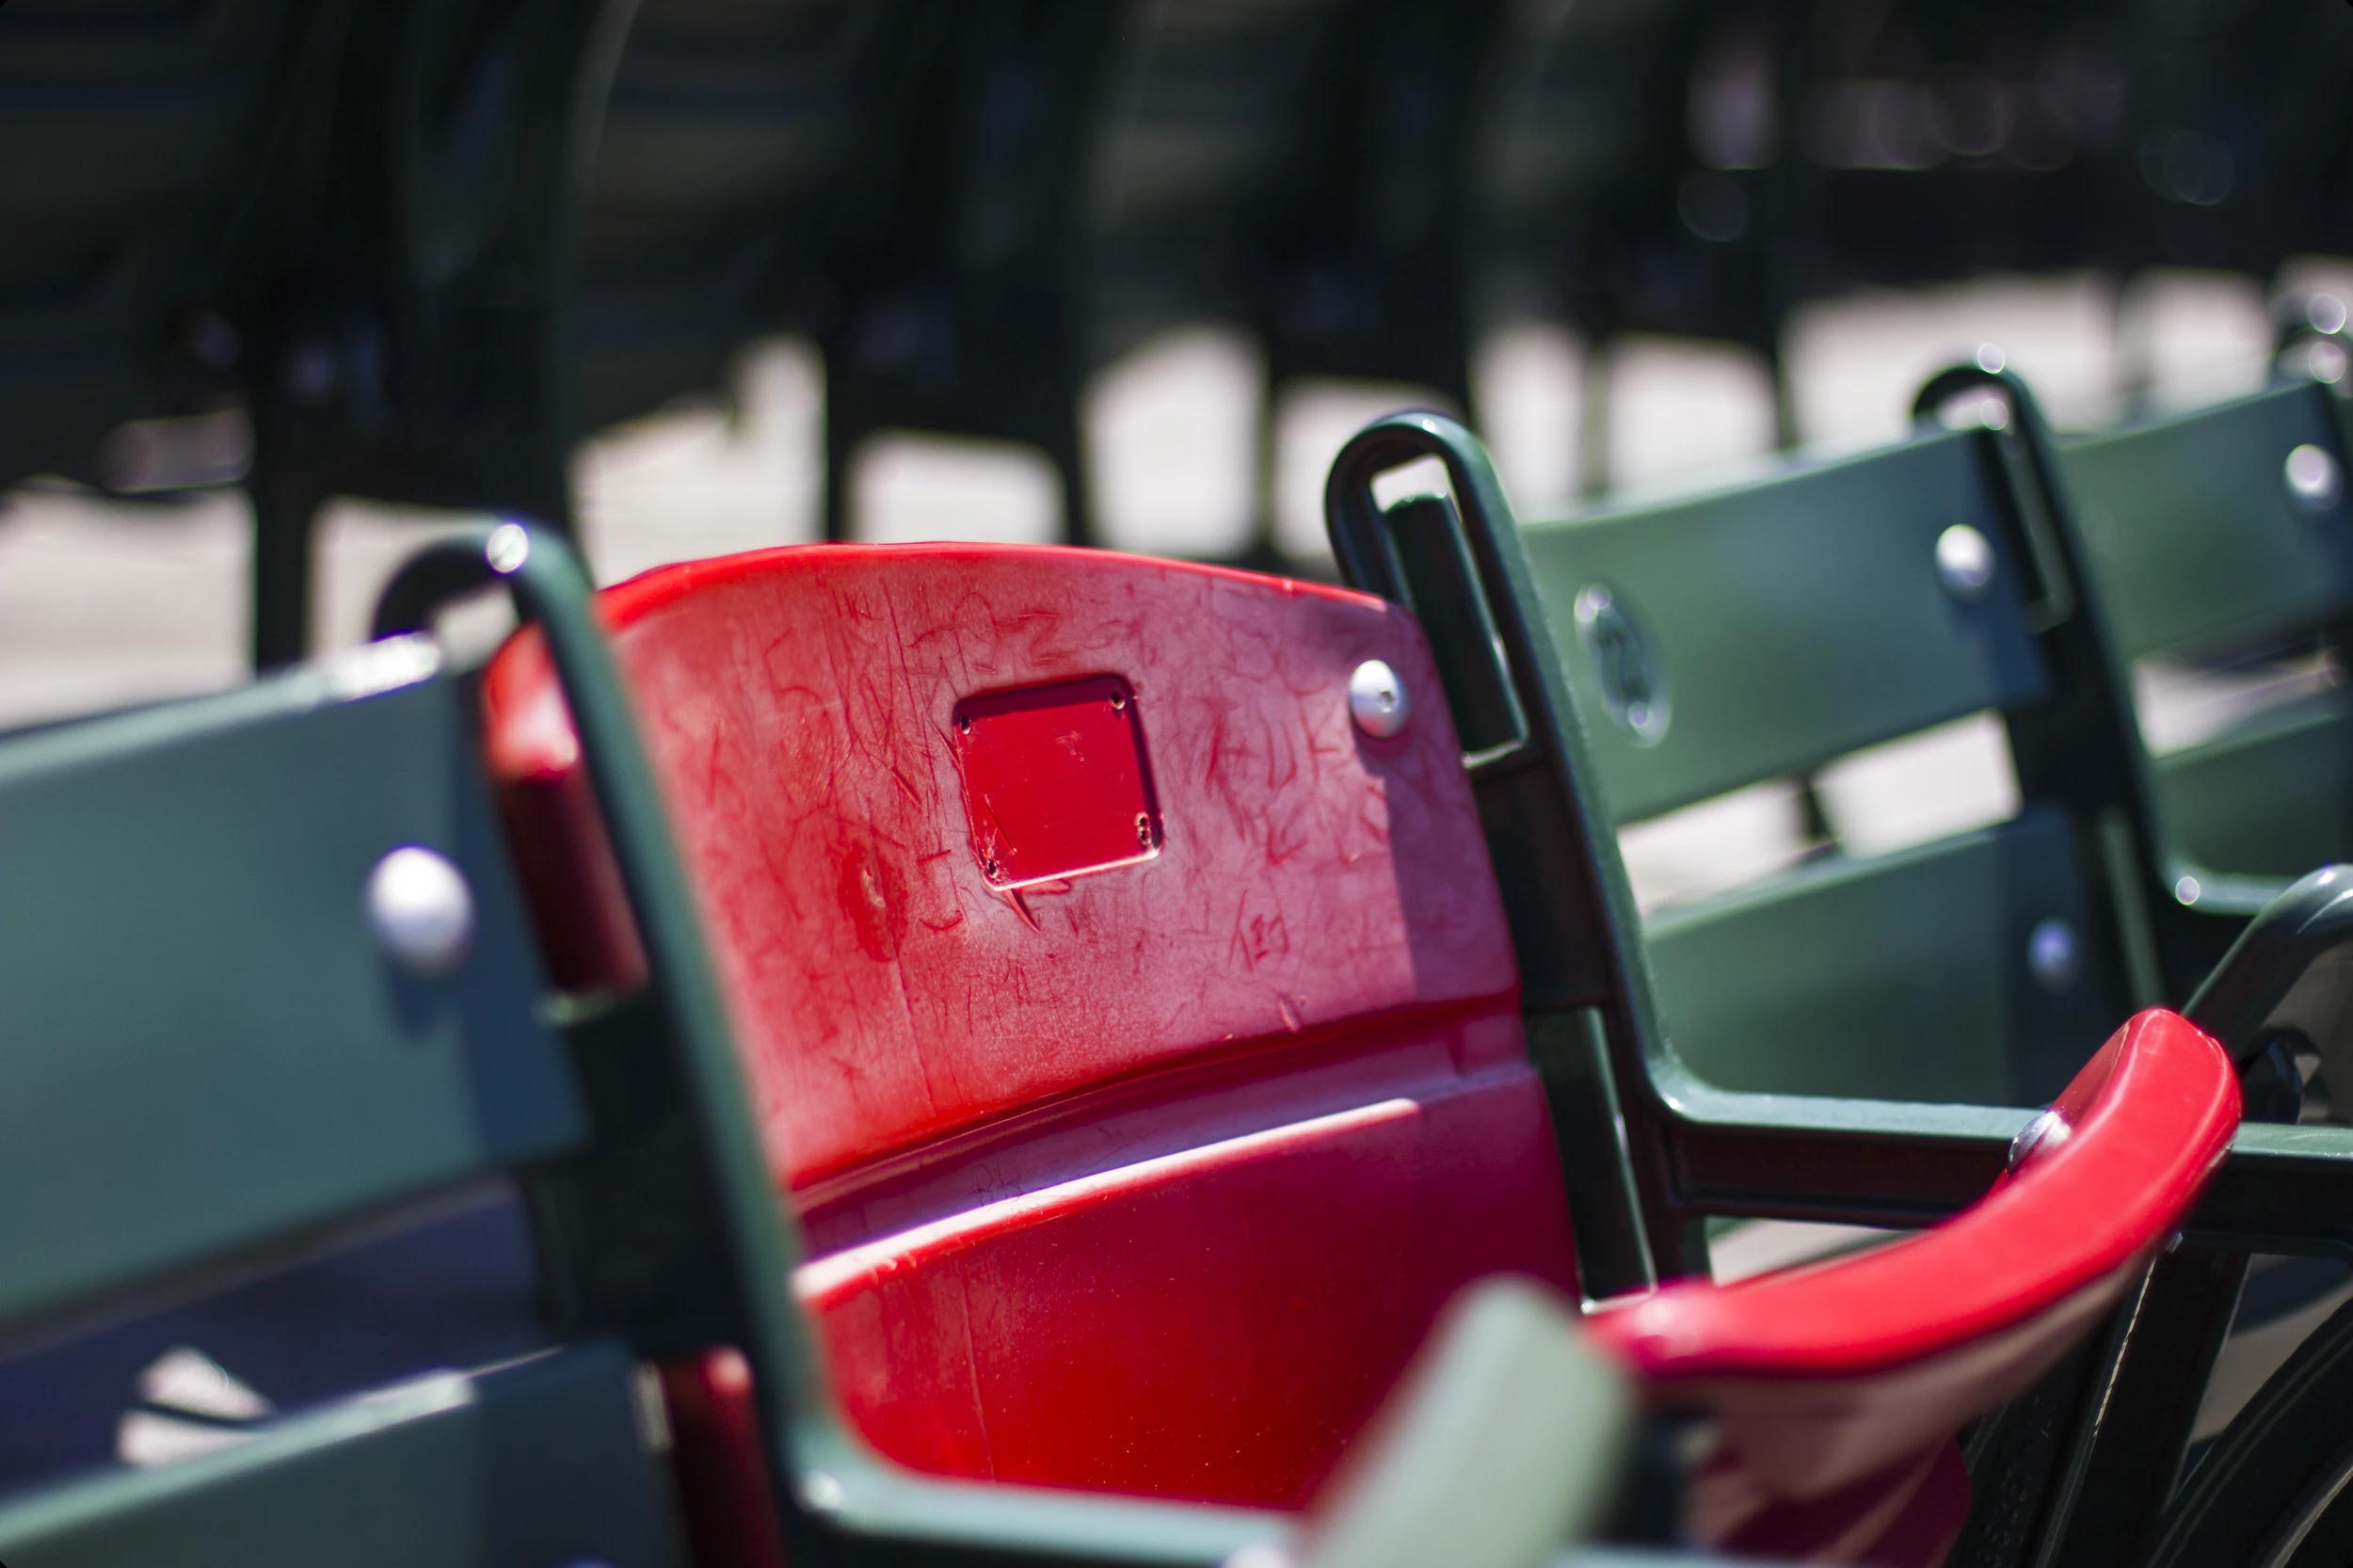 The Hidden Story Behind 'The Red Seat' at Fenway Park